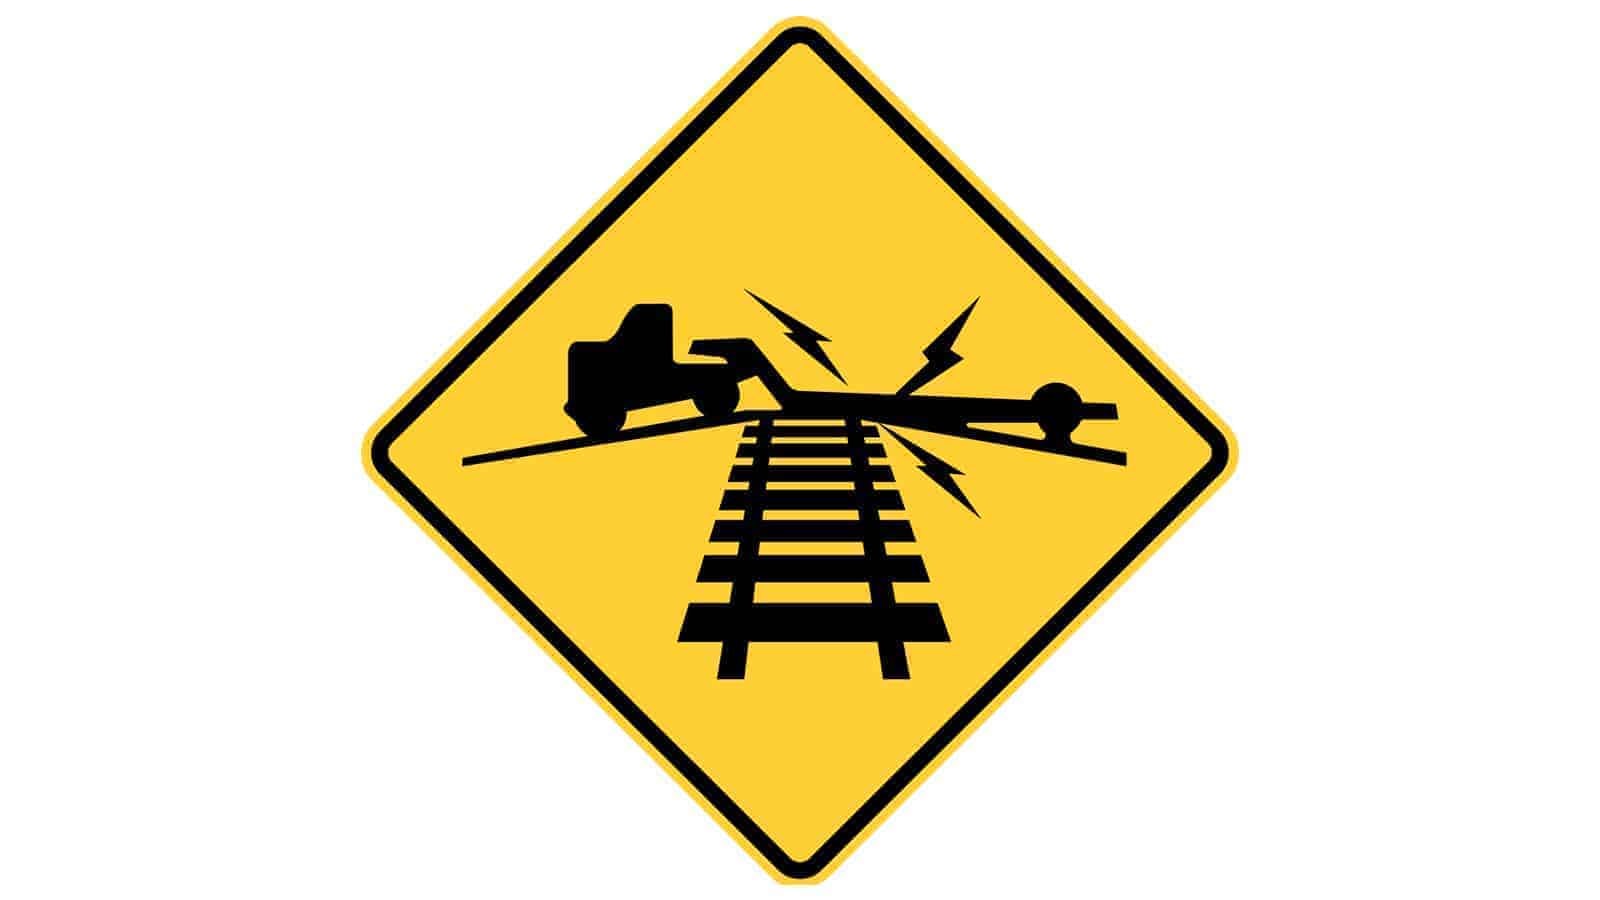 Warning sign Low Ground Clearance Railroad Crossing